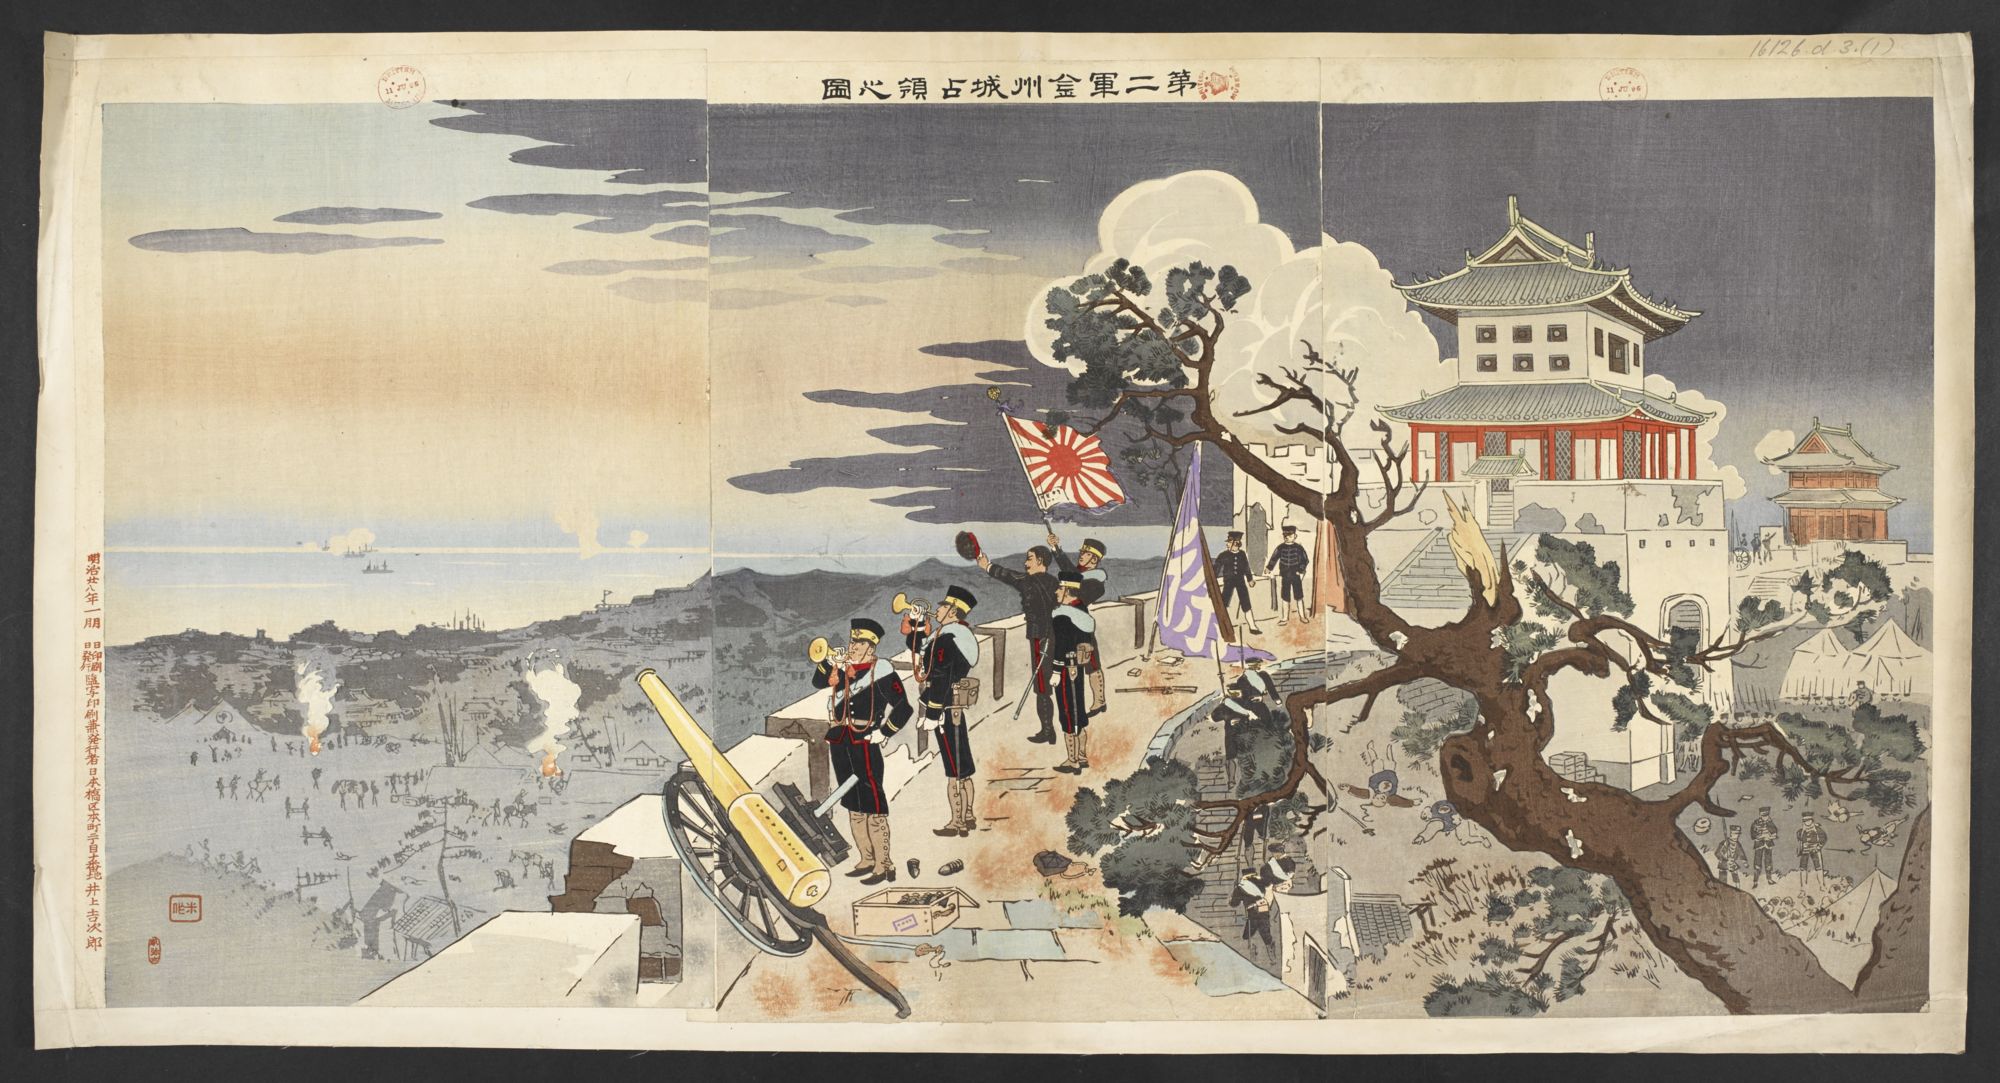 The Japanese 2nd Army occupies Jinzhoucheng